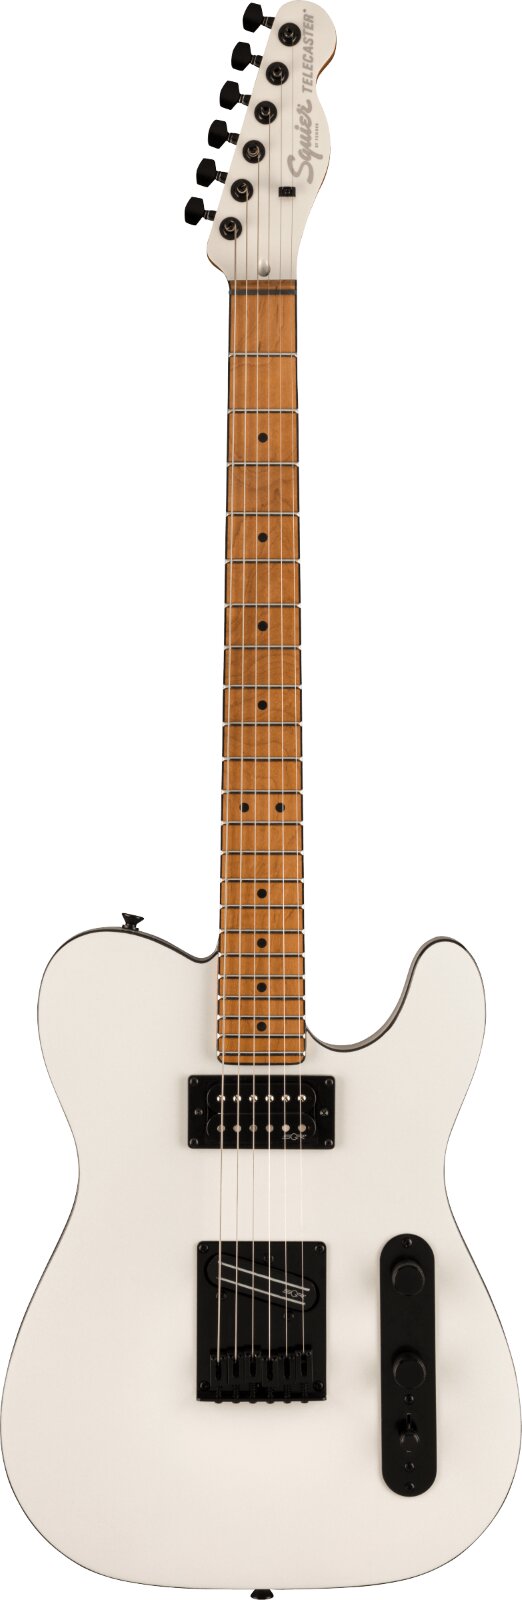 Squier Contemporary Telecaster RH Roasted Maple Fingerboard Pearl White : photo 1